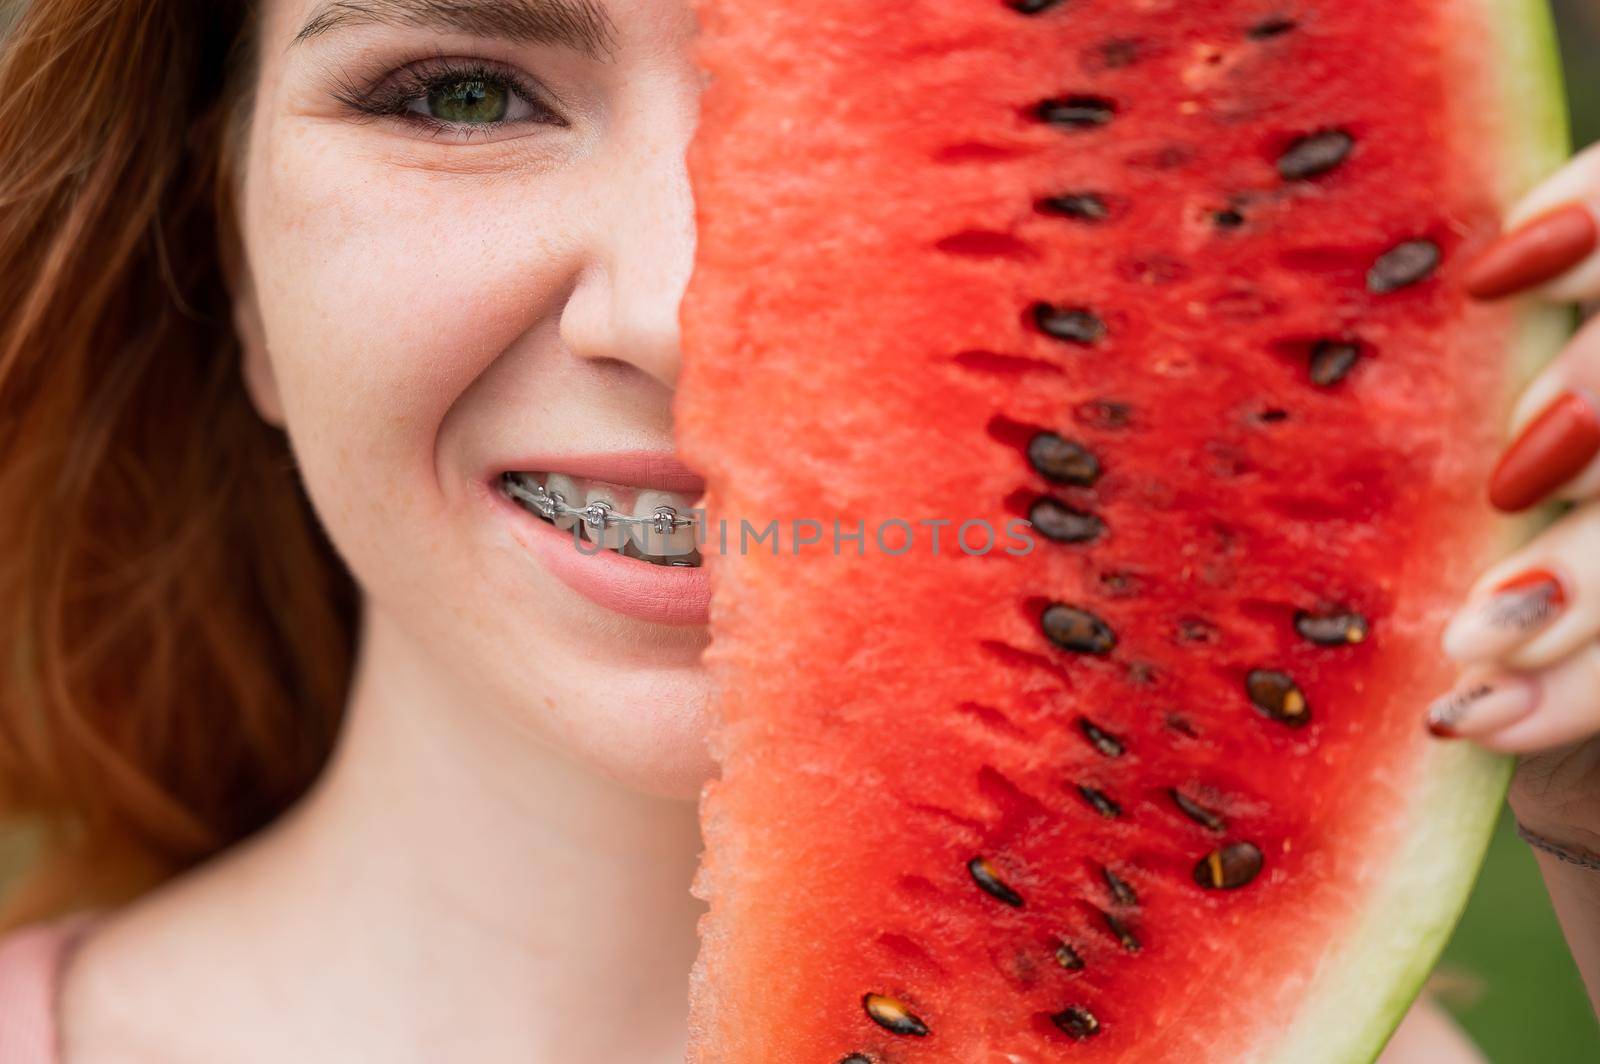 Beautiful red-haired woman smiling with braces on her teeth covers half of her face with a slice of watermelon outdoors in summer.